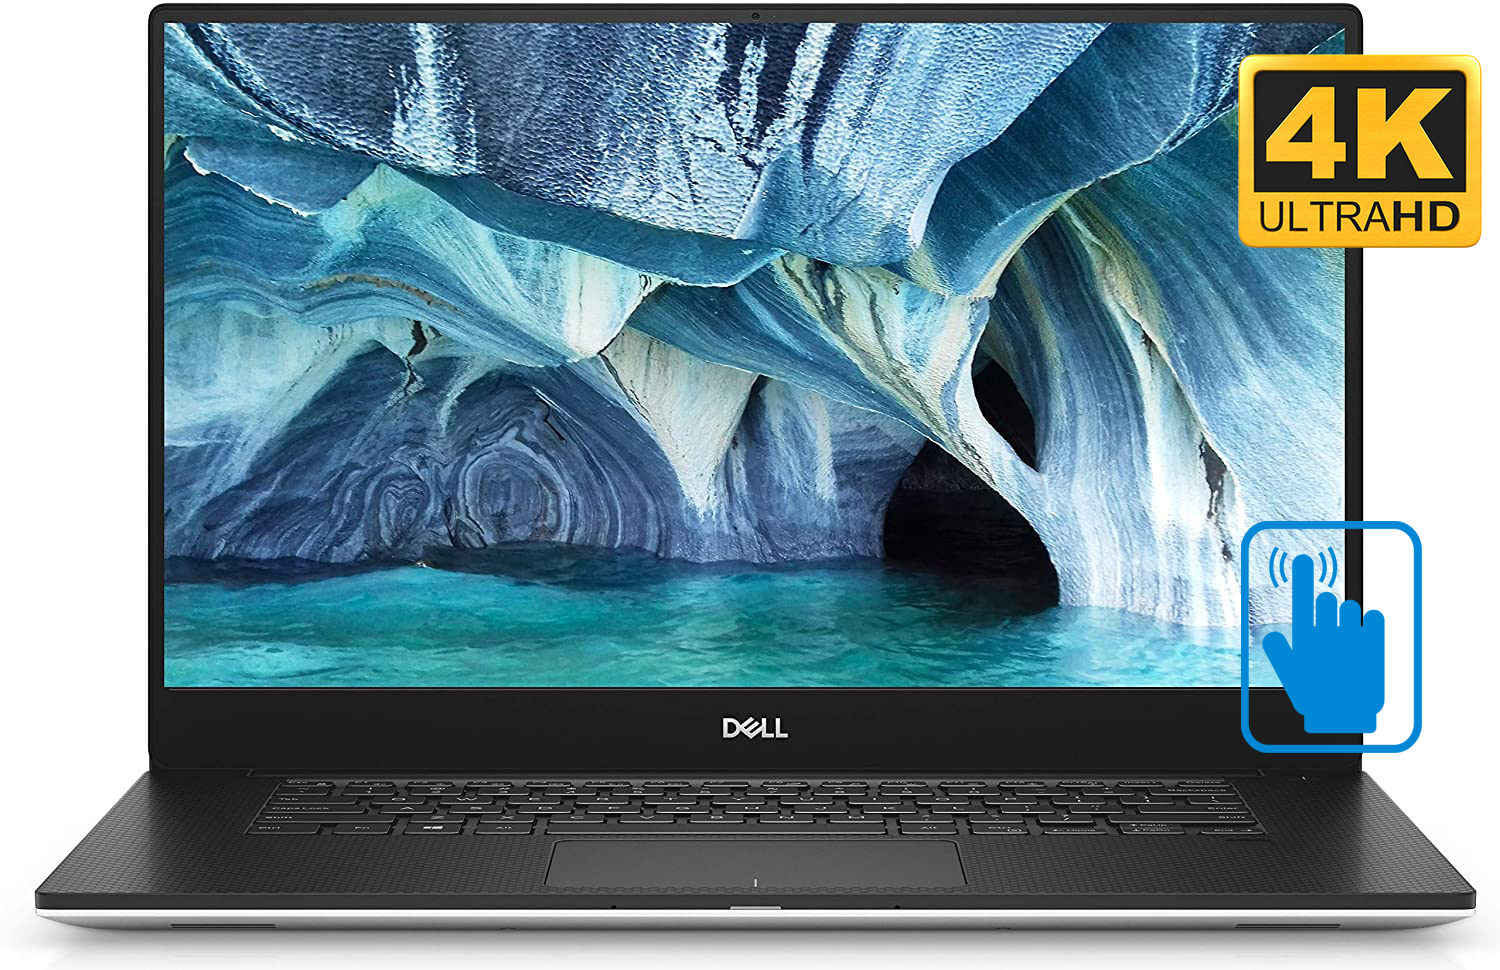 Dell XPS 9570 Home/Business Laptop (Intel i7-8750H 6-Core, 15.6in 60Hz  Touch 4K Ultra HD (3840x2160), NVIDIA GTX 1050 Ti, 32GB RAM, 1TB PCIe SSD,  Win 11 Pro) Refurbished (Refurbished)